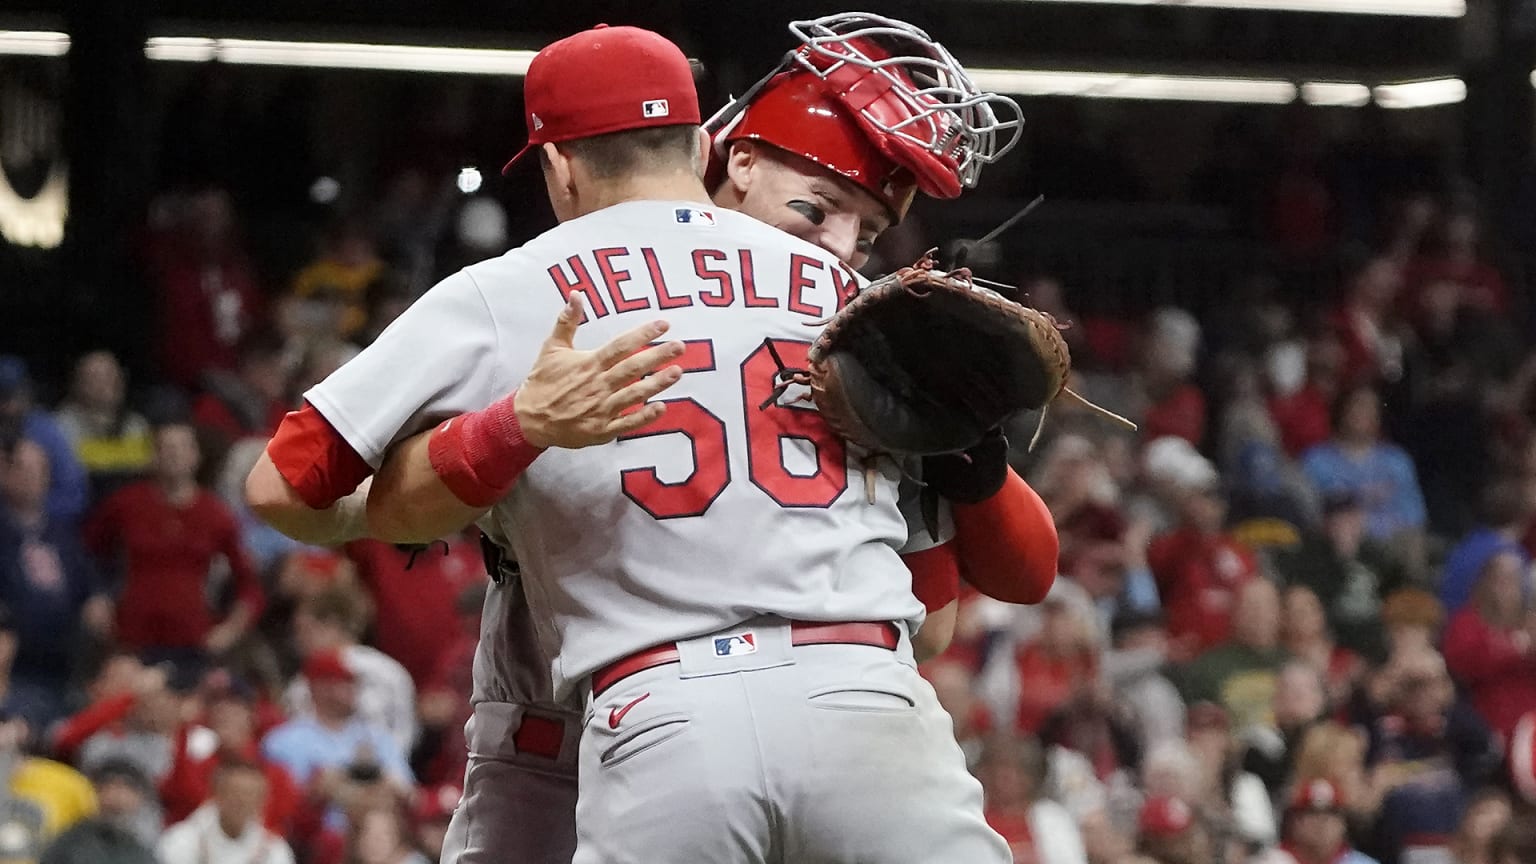 Cardinals pitcher Ryan Helsley hugs his catcher after the final out